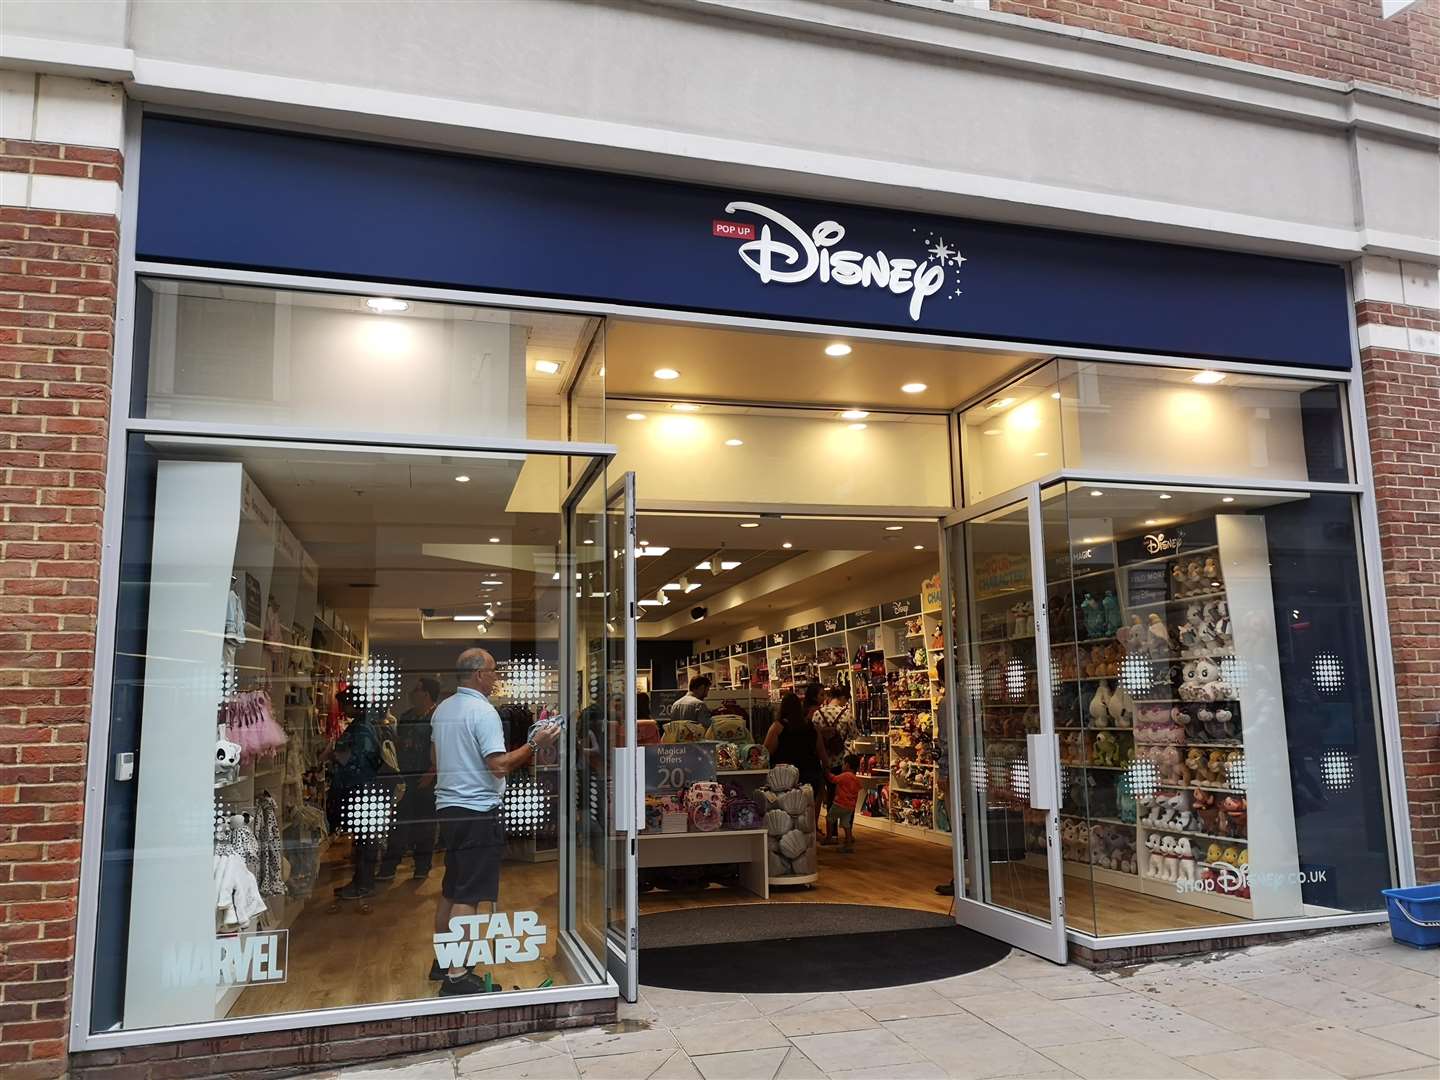 The pop-up DIsney store has opened in Canterbury